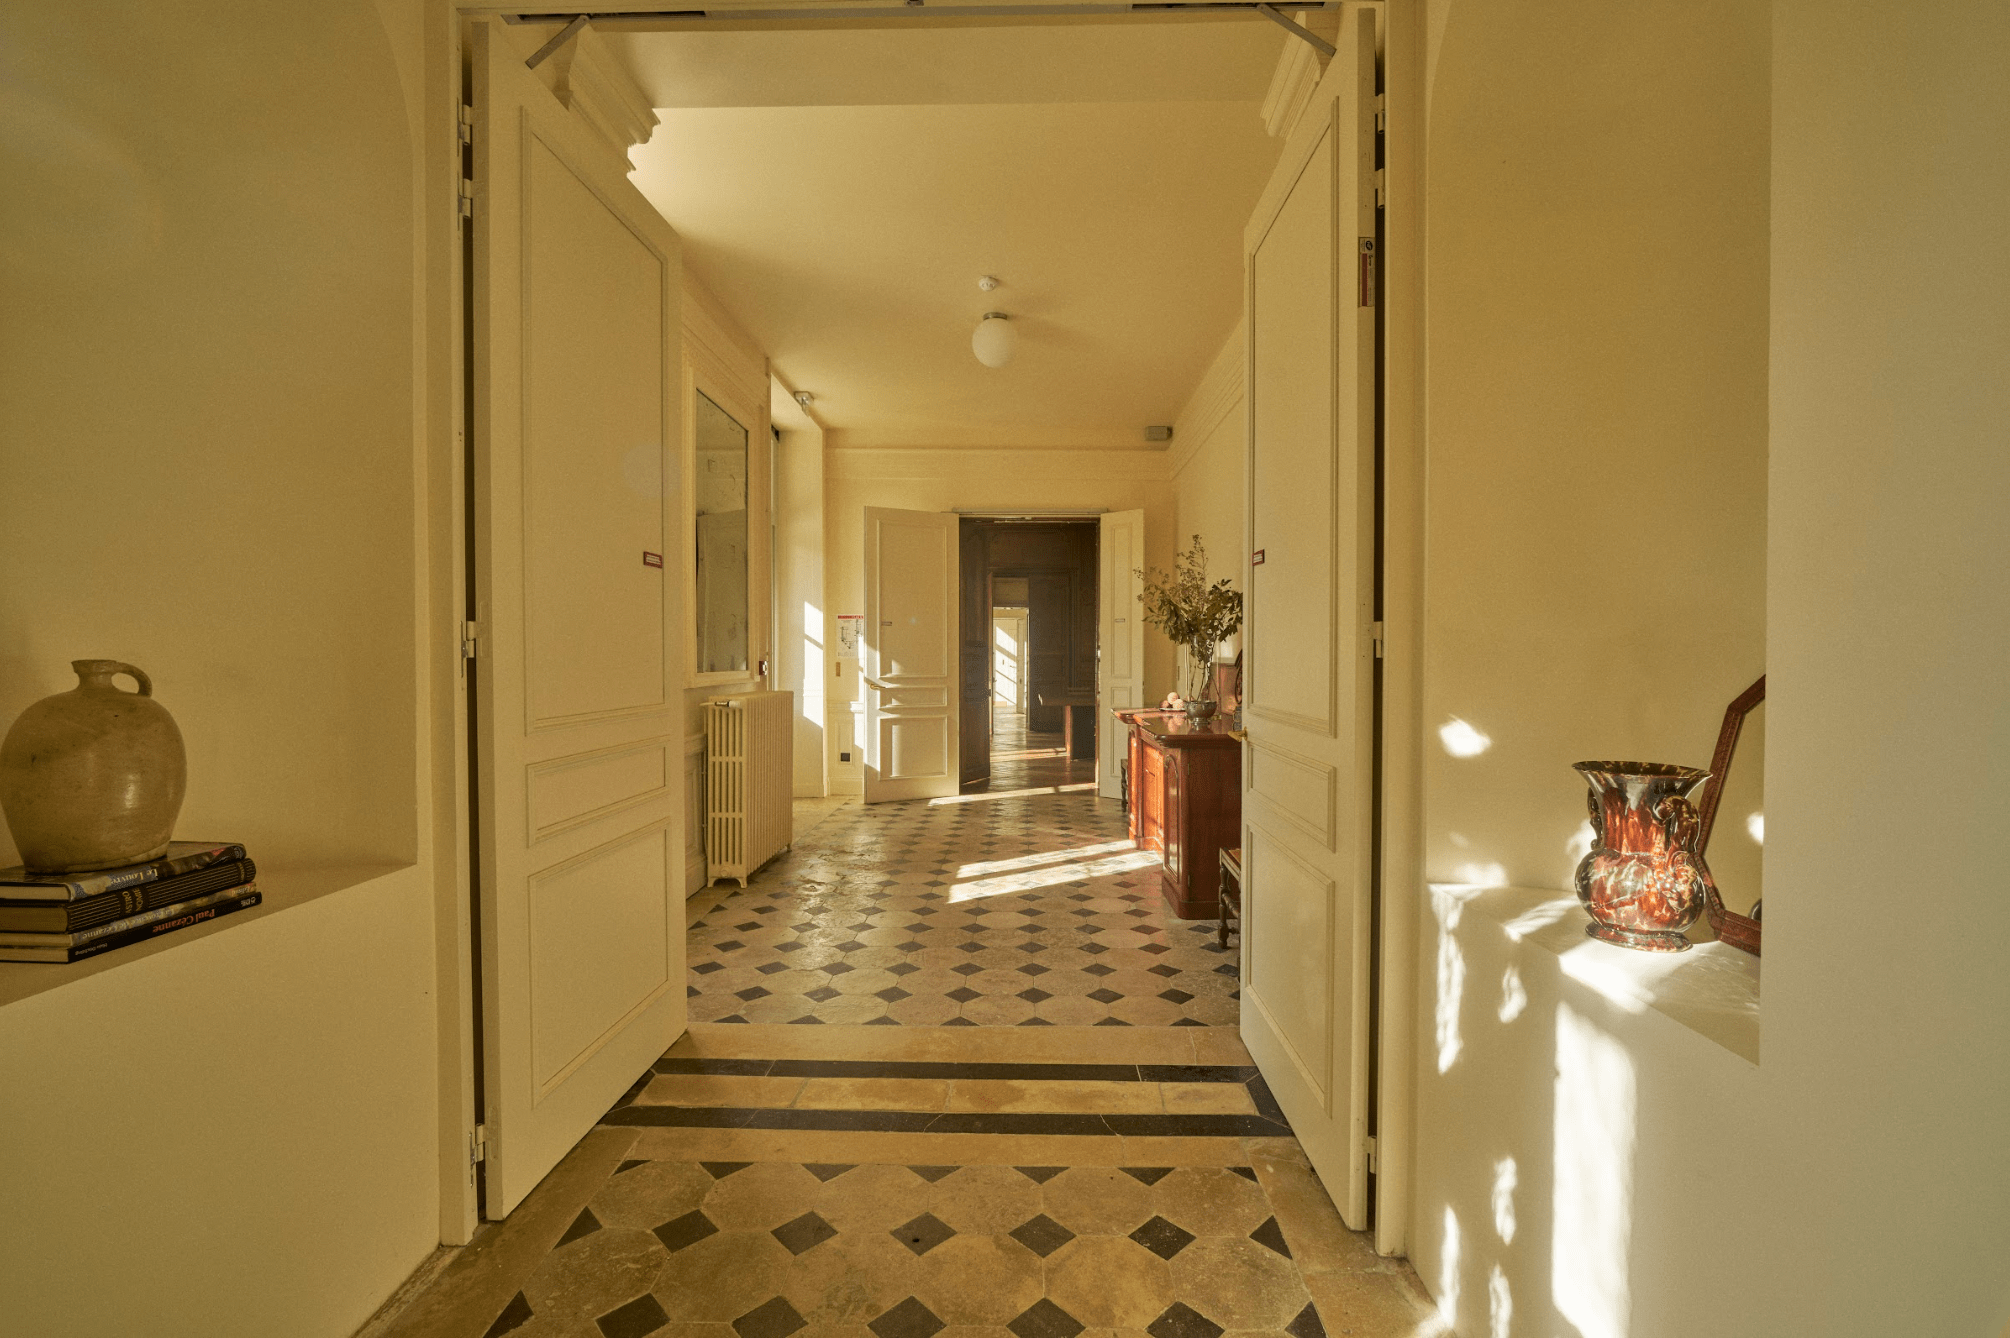 One of the castle corridors: white and blue tiling, white walls